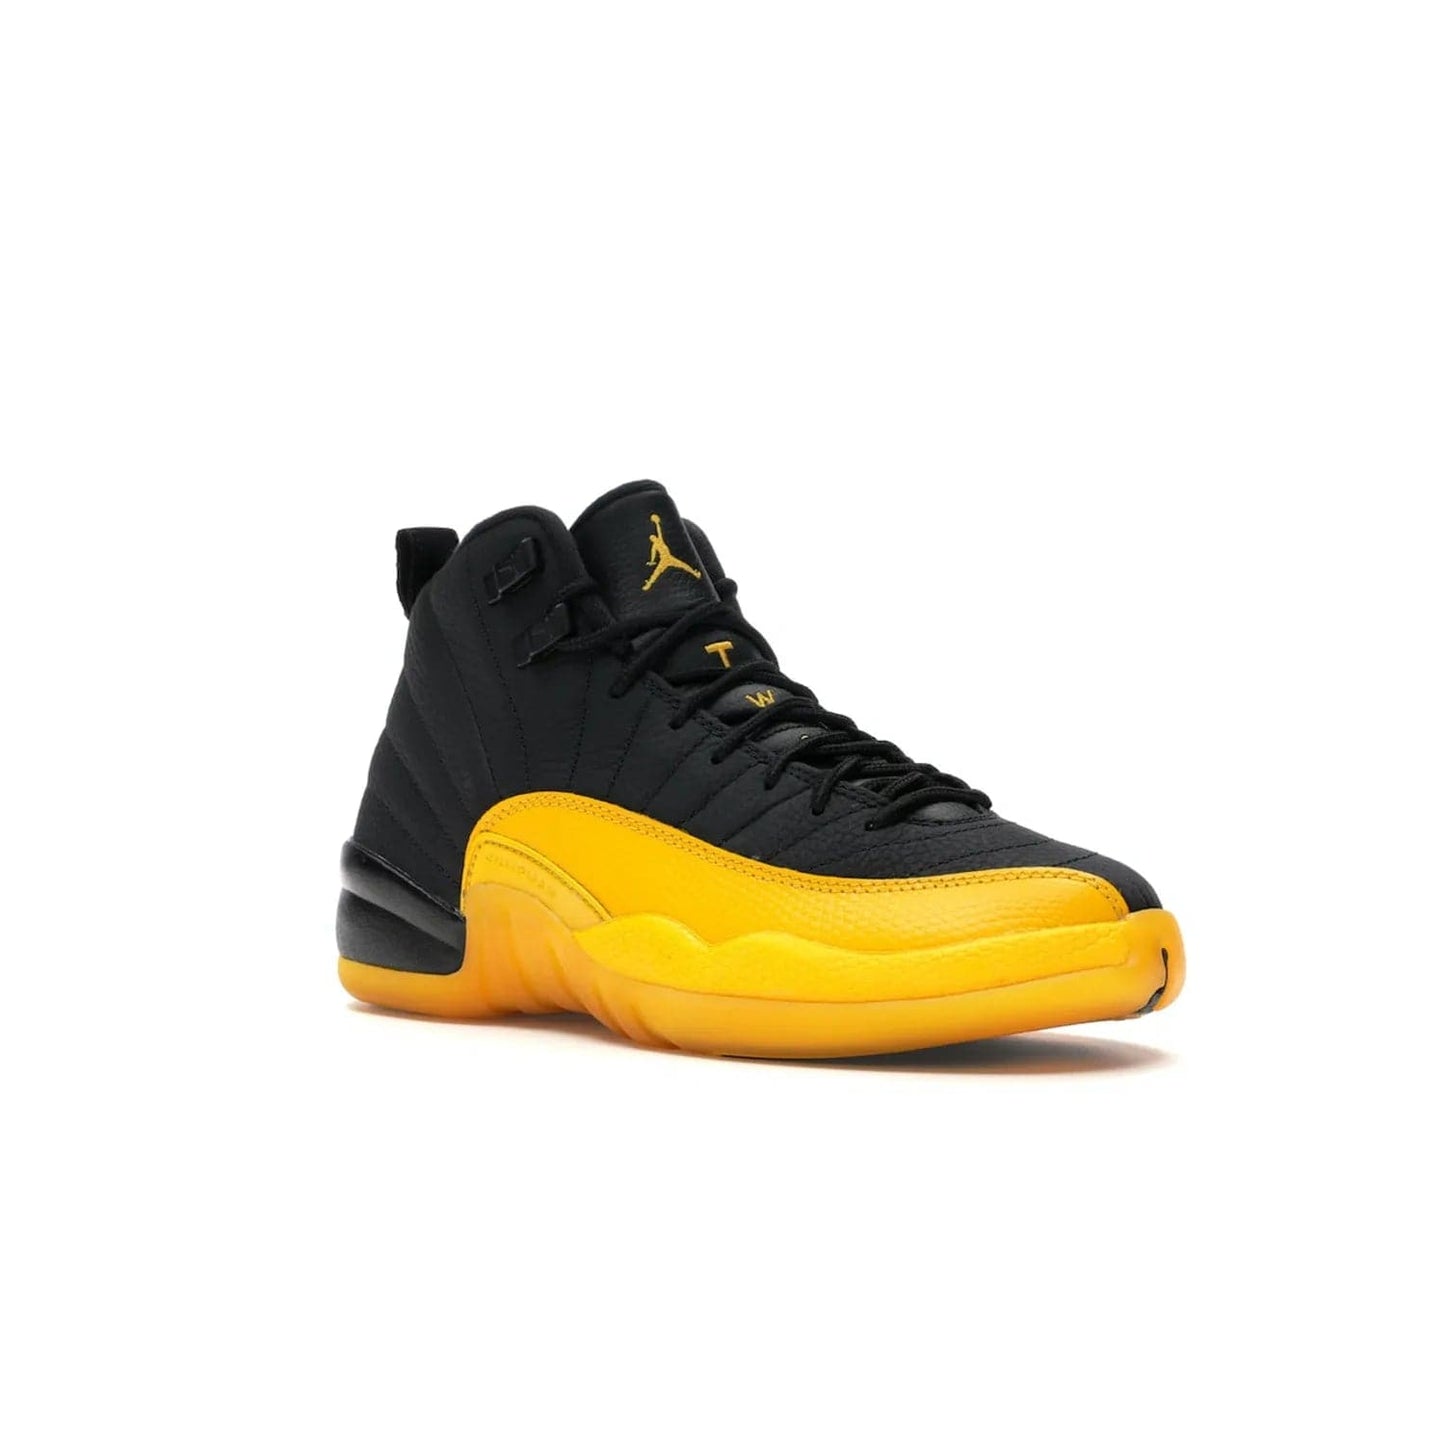 Jordan 12 Retro Black University Gold (GS) - Image 5 - Only at www.BallersClubKickz.com - Upgrade your kid's shoe collection with the Jordan 12 Retro Black University Gold. With classic style, black tumbled leather upper, and University Gold accents, it's a great summer look. Out July 2020.